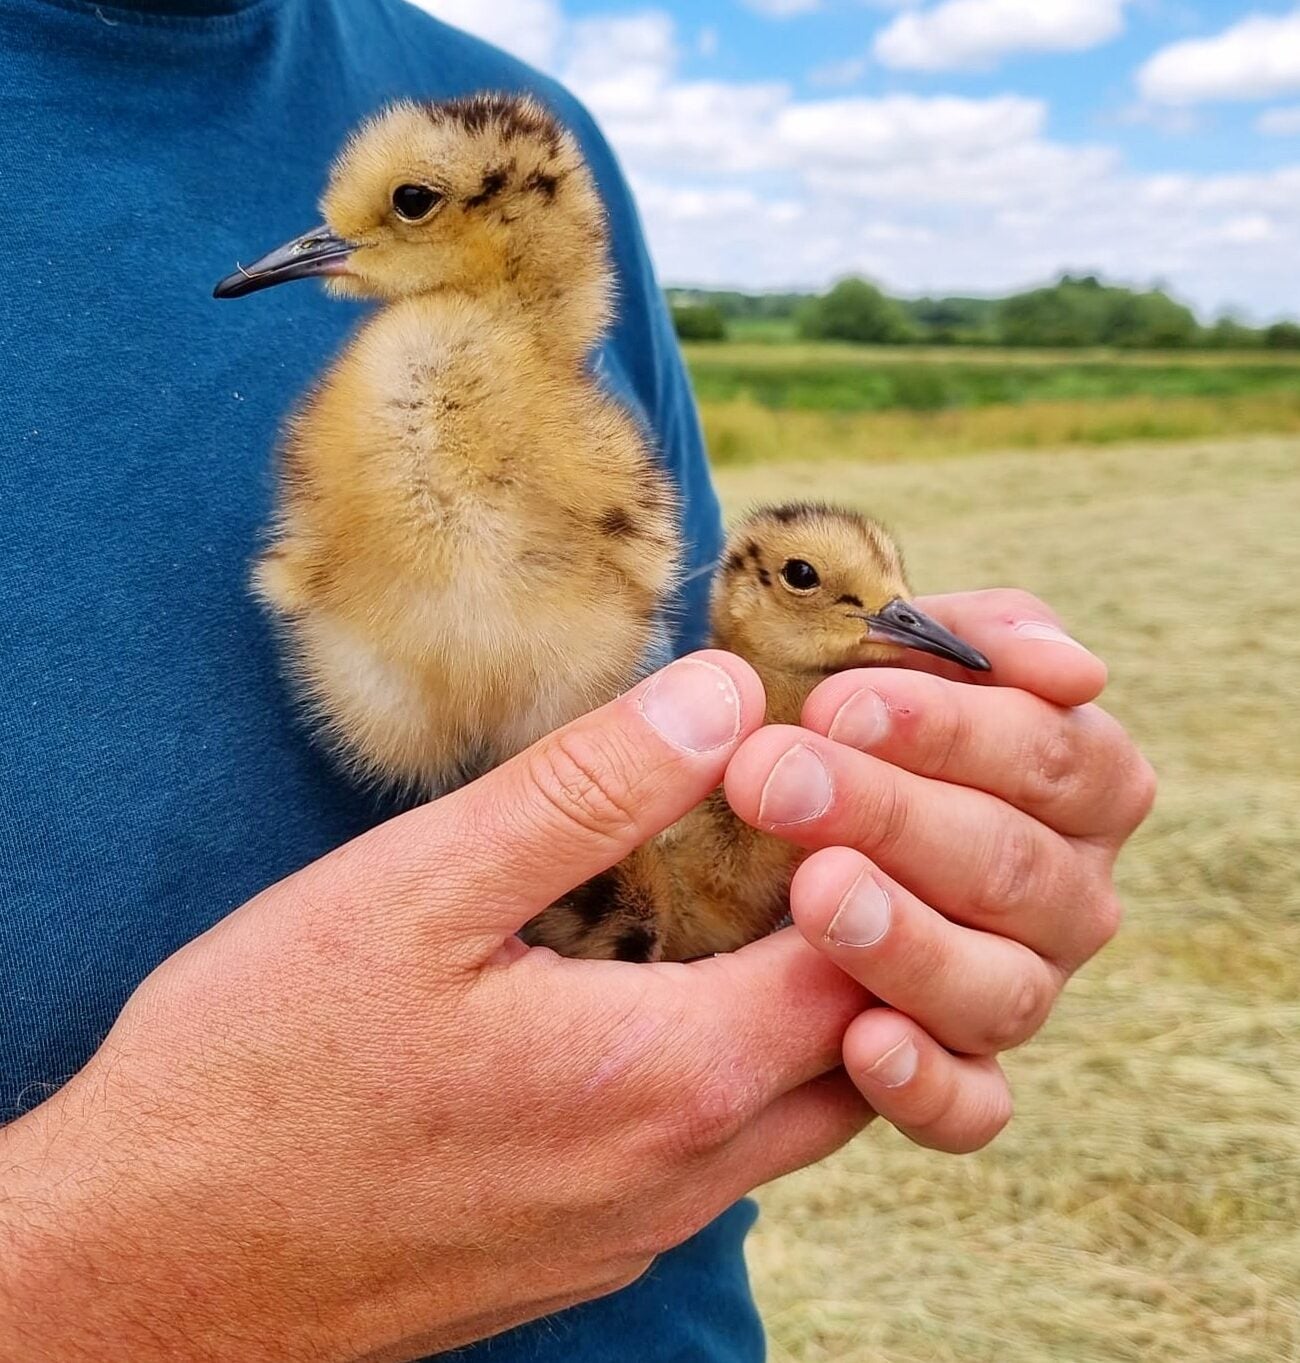 a biologist's hands gently cup two tiny curlew chicks. The chicks are small enough to fit in to the palm of each hand. One chick stands upright in an adorable alert posture. The other is nestled into his palm, looking quite relaxed.